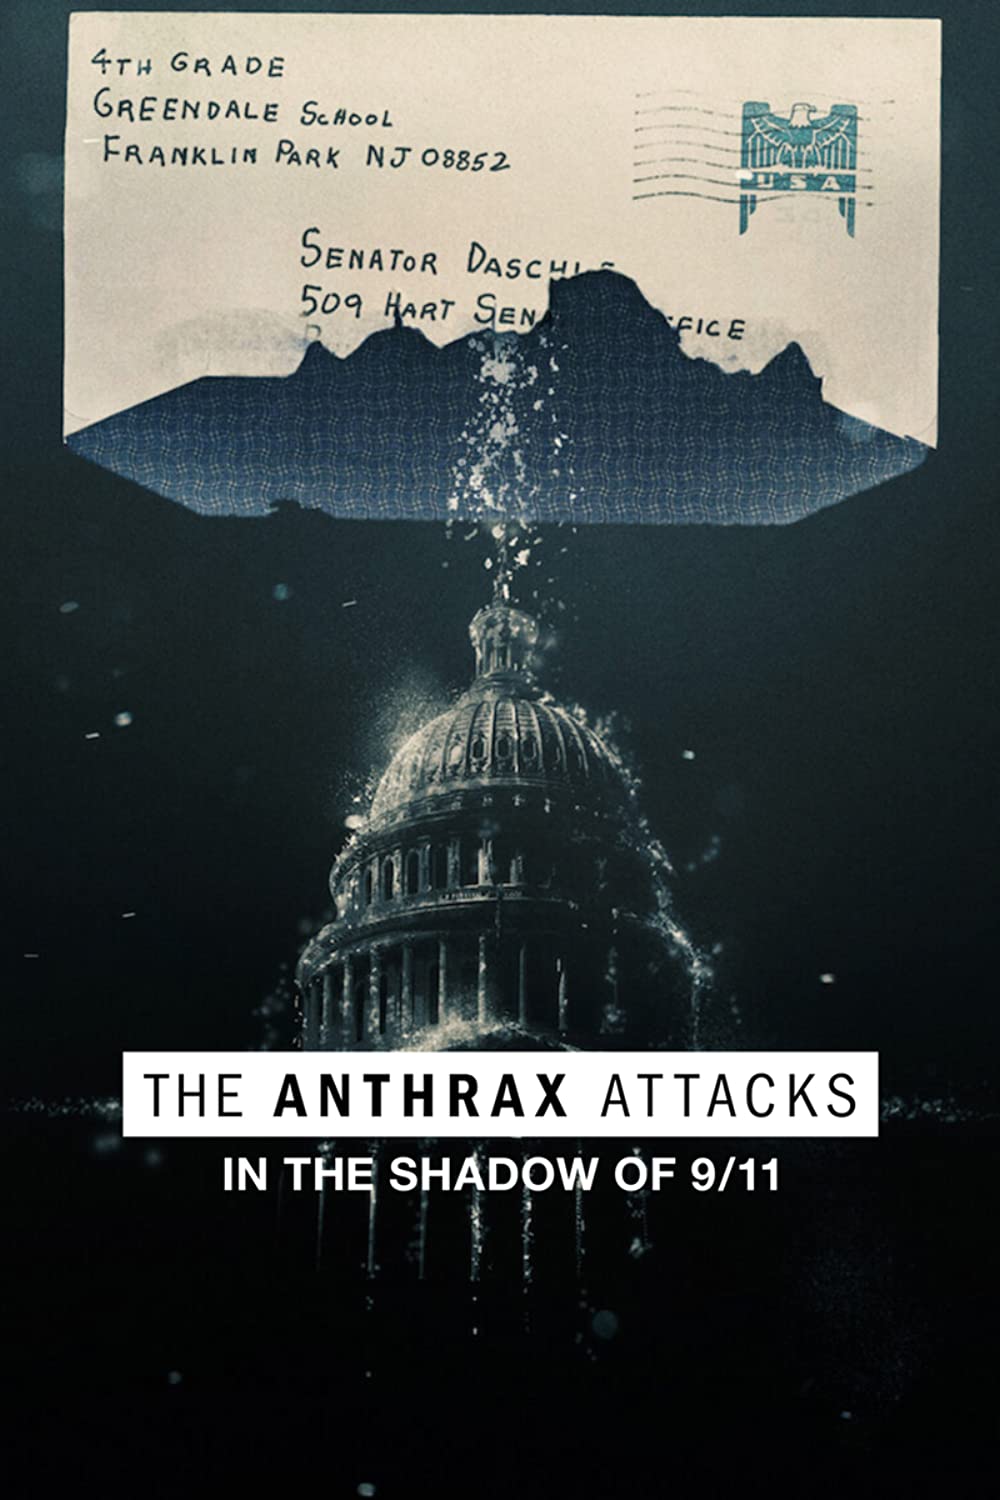 Is Anthrax Attacks (2022) available on Netflix